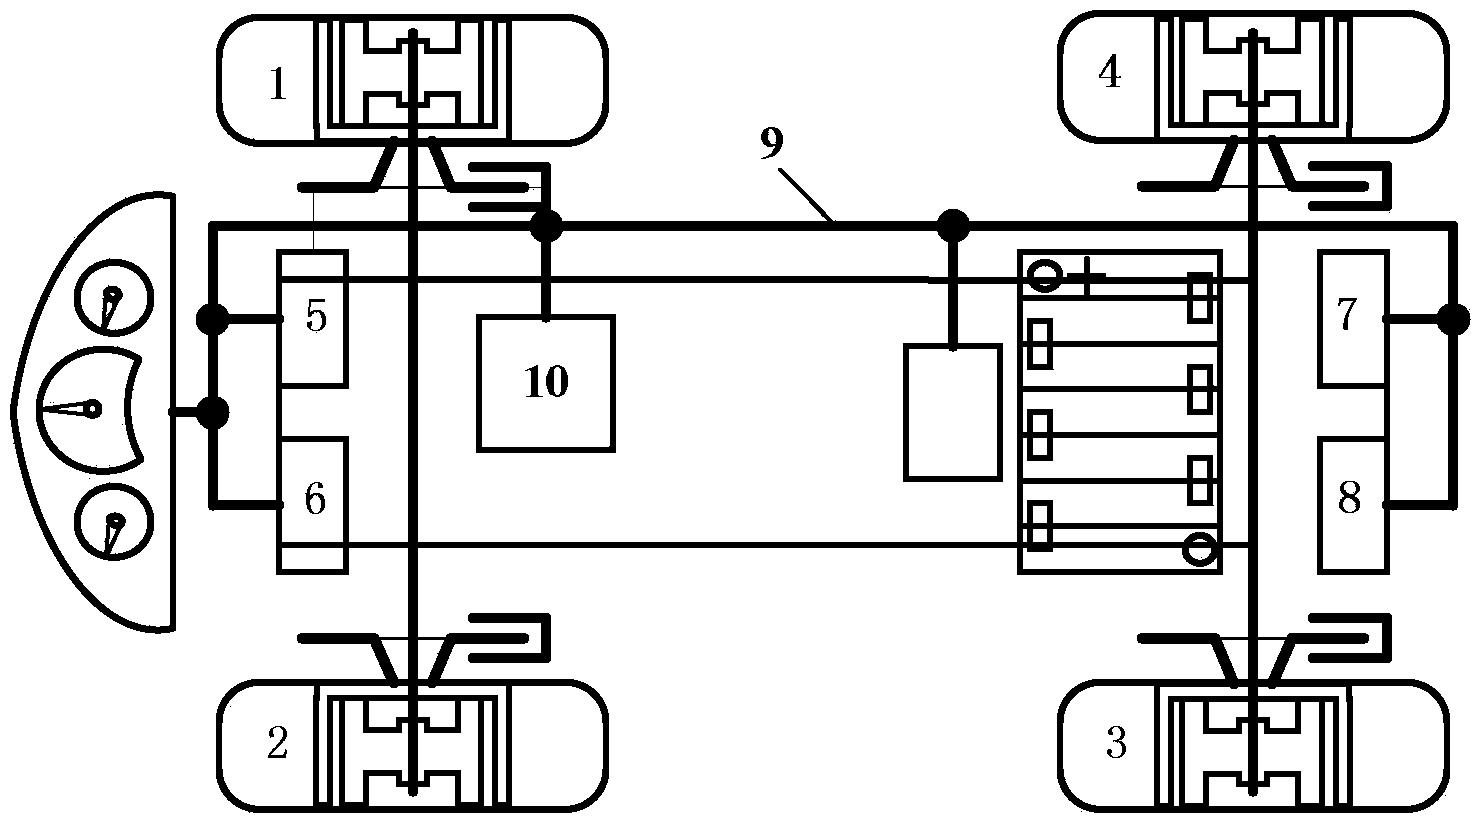 Maximum torque estimation and acceleration slip regulation algorithm for four-wheel independently driven electric vehicle